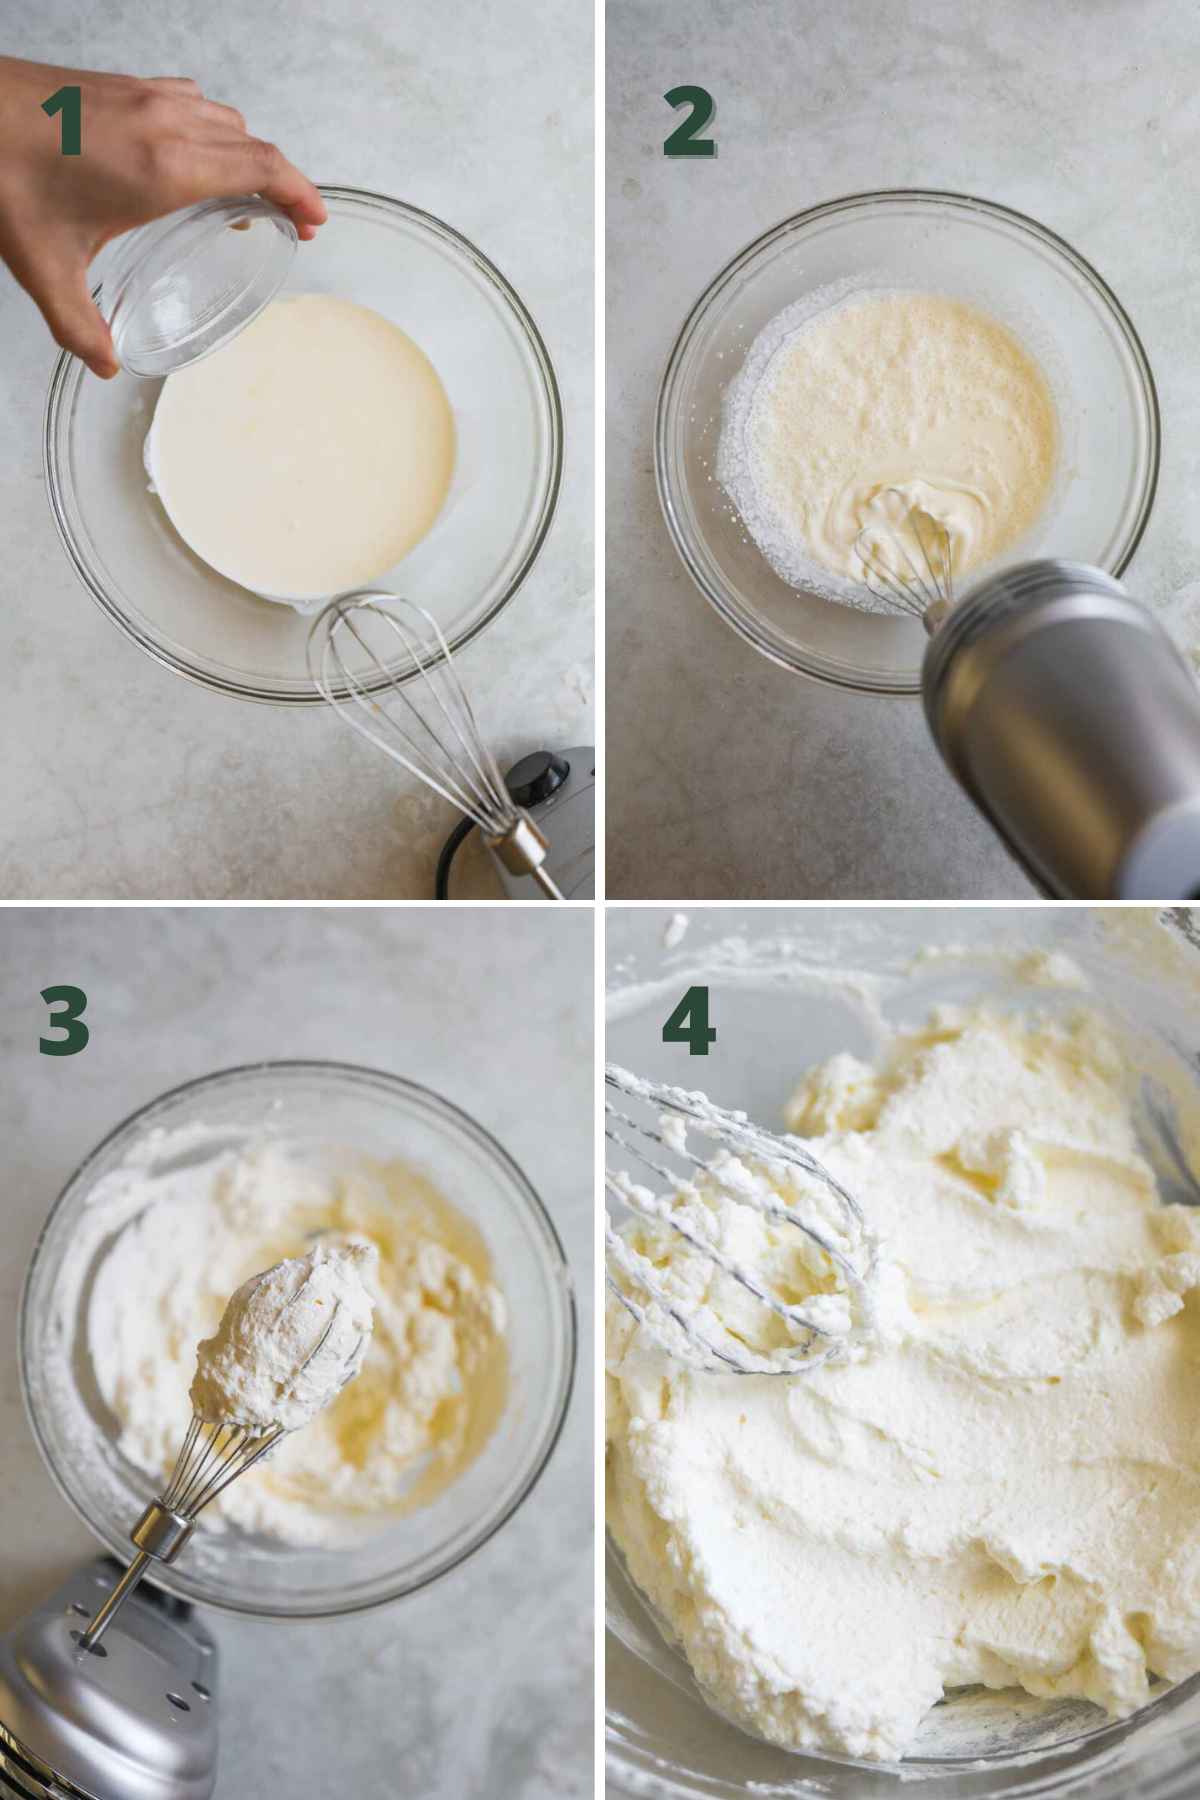 Steps to make easy homemade whipped cream, including adding honey or sugar to heavy whipping cream, whipping with a mixer or whisk, whisking until the cream forms stiff peaks.